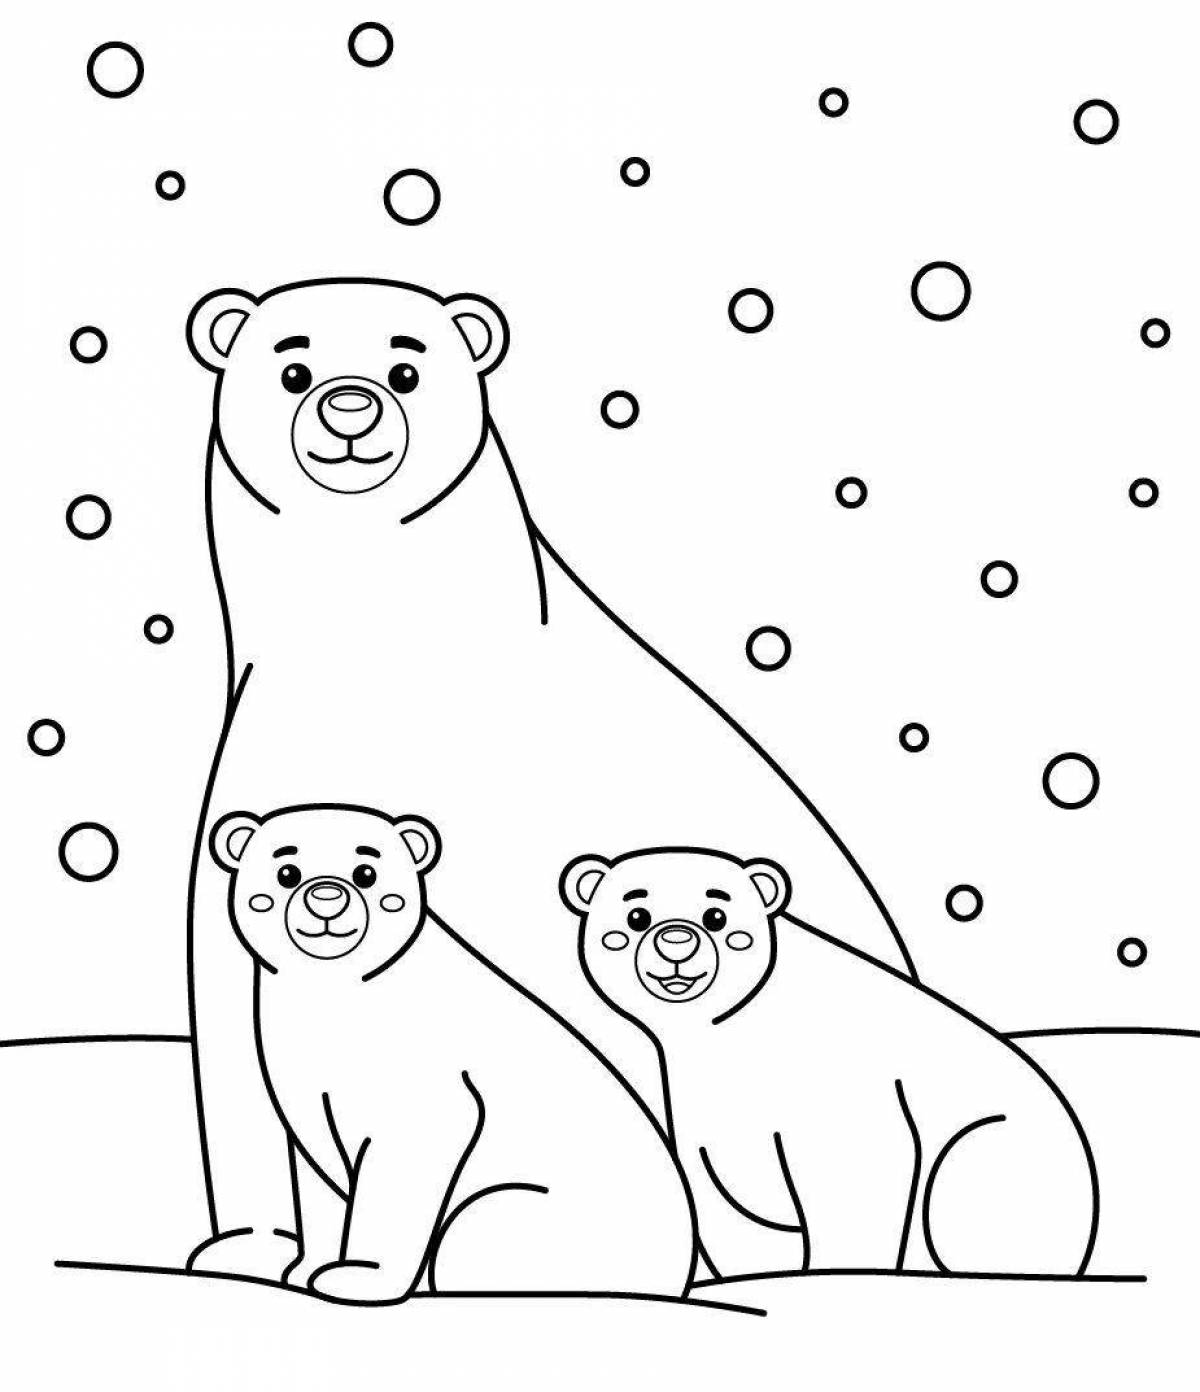 Caring bear family coloring page